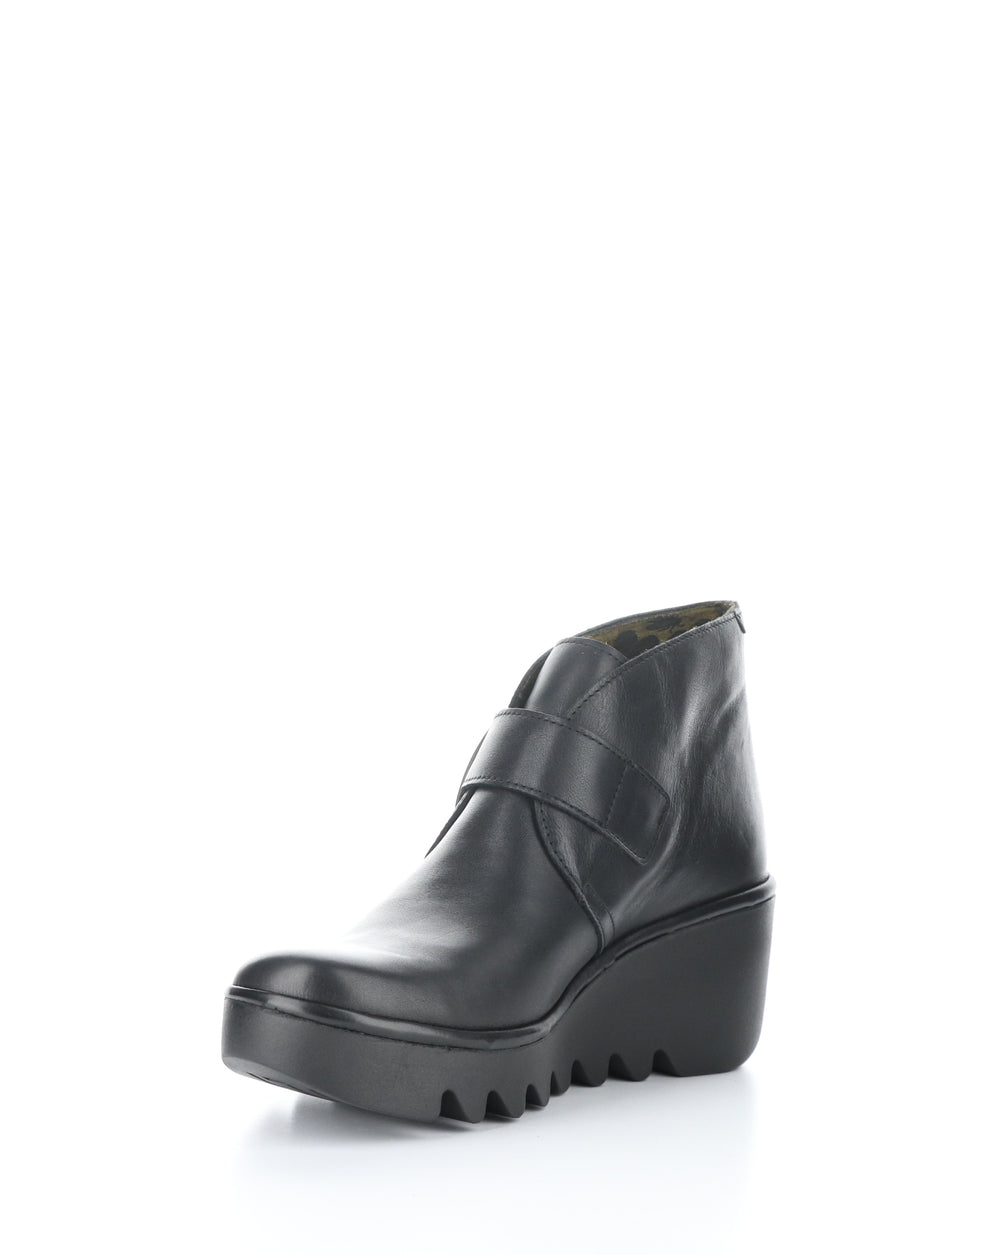 BIRT397FLY 004 BLACK Round Toe Boots